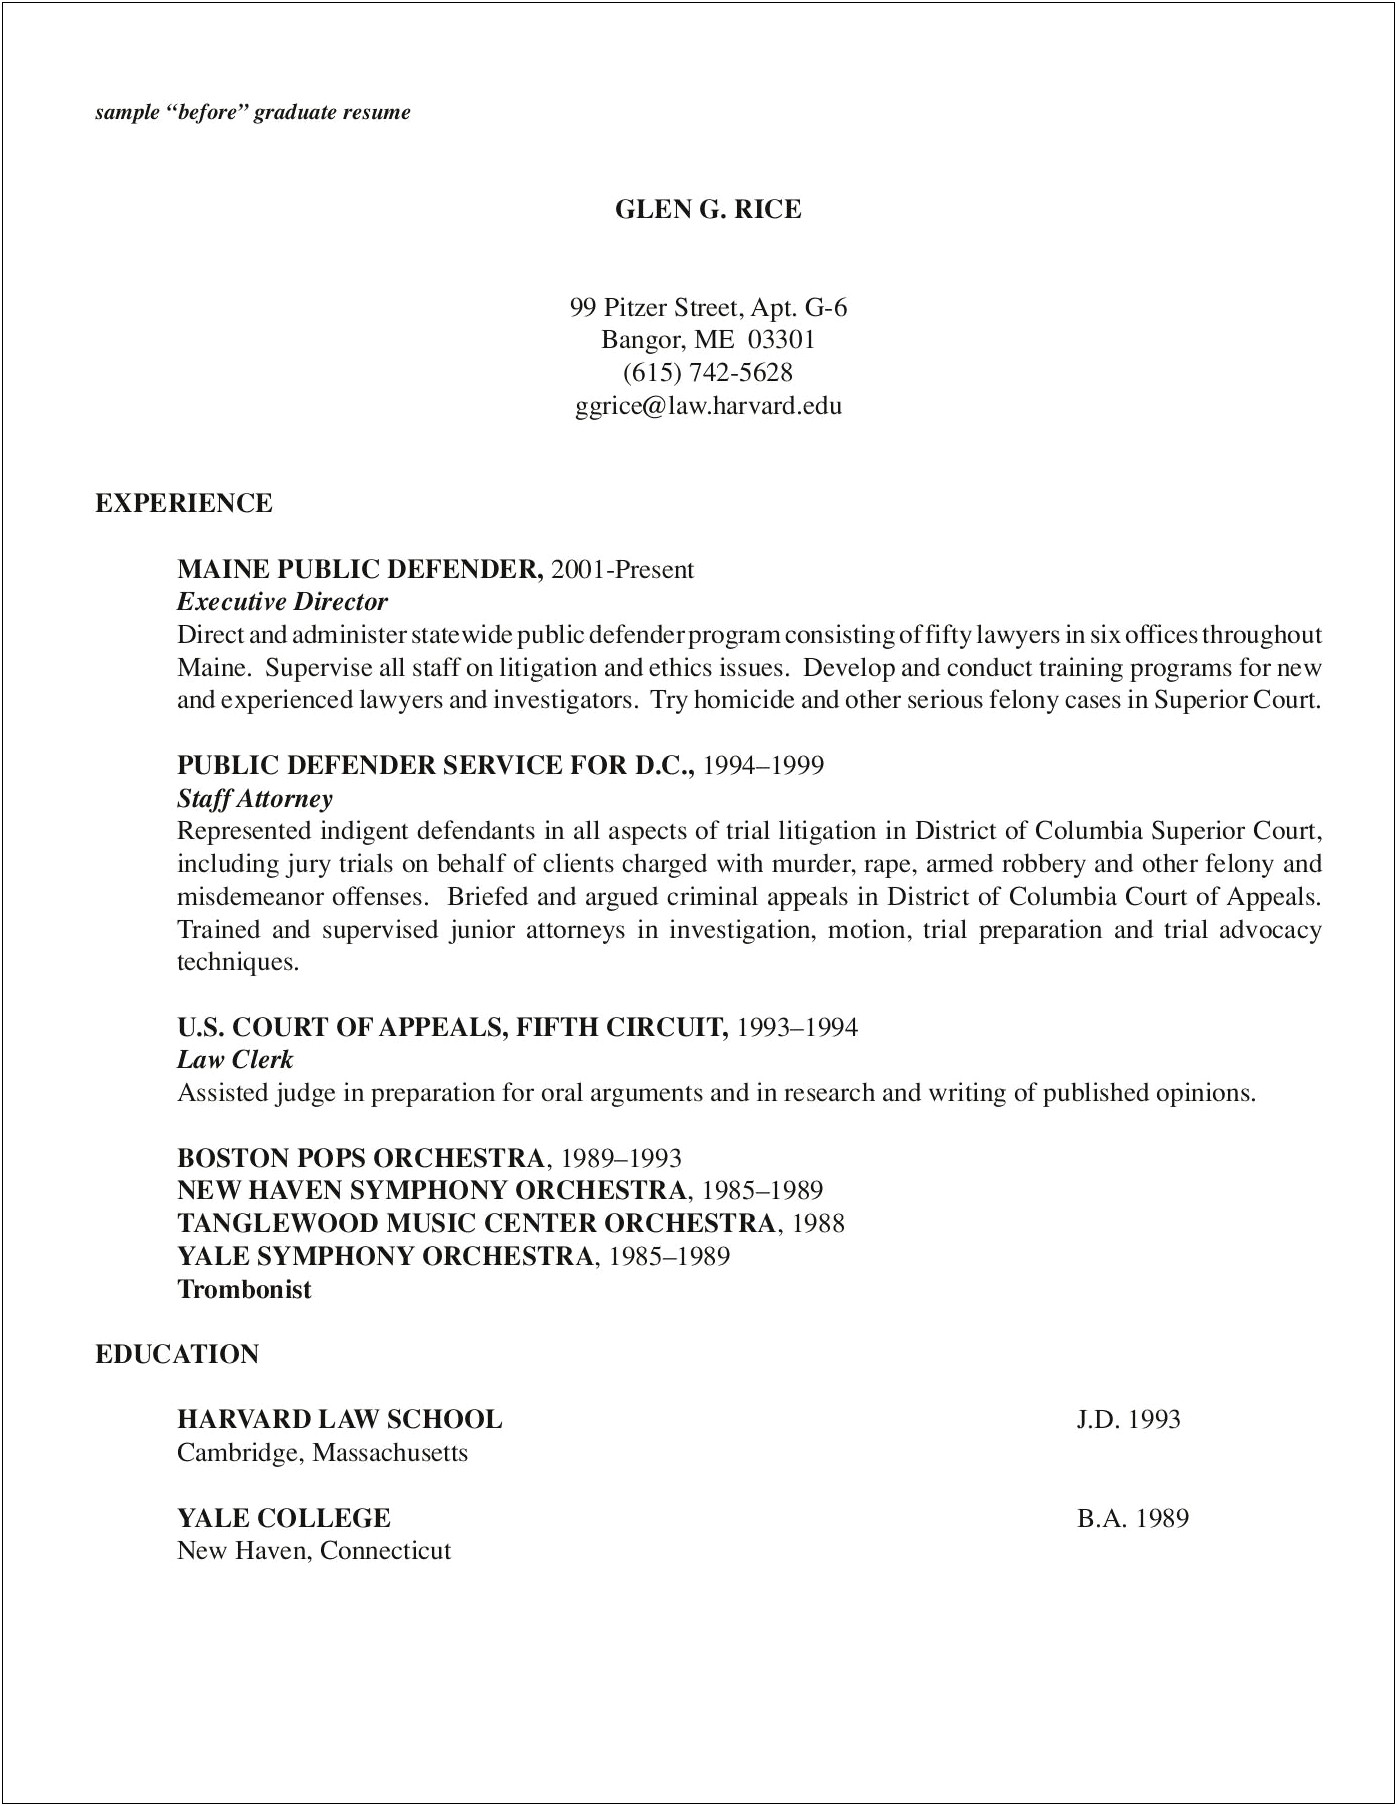 Resume From Ivy League Template Free Pdf